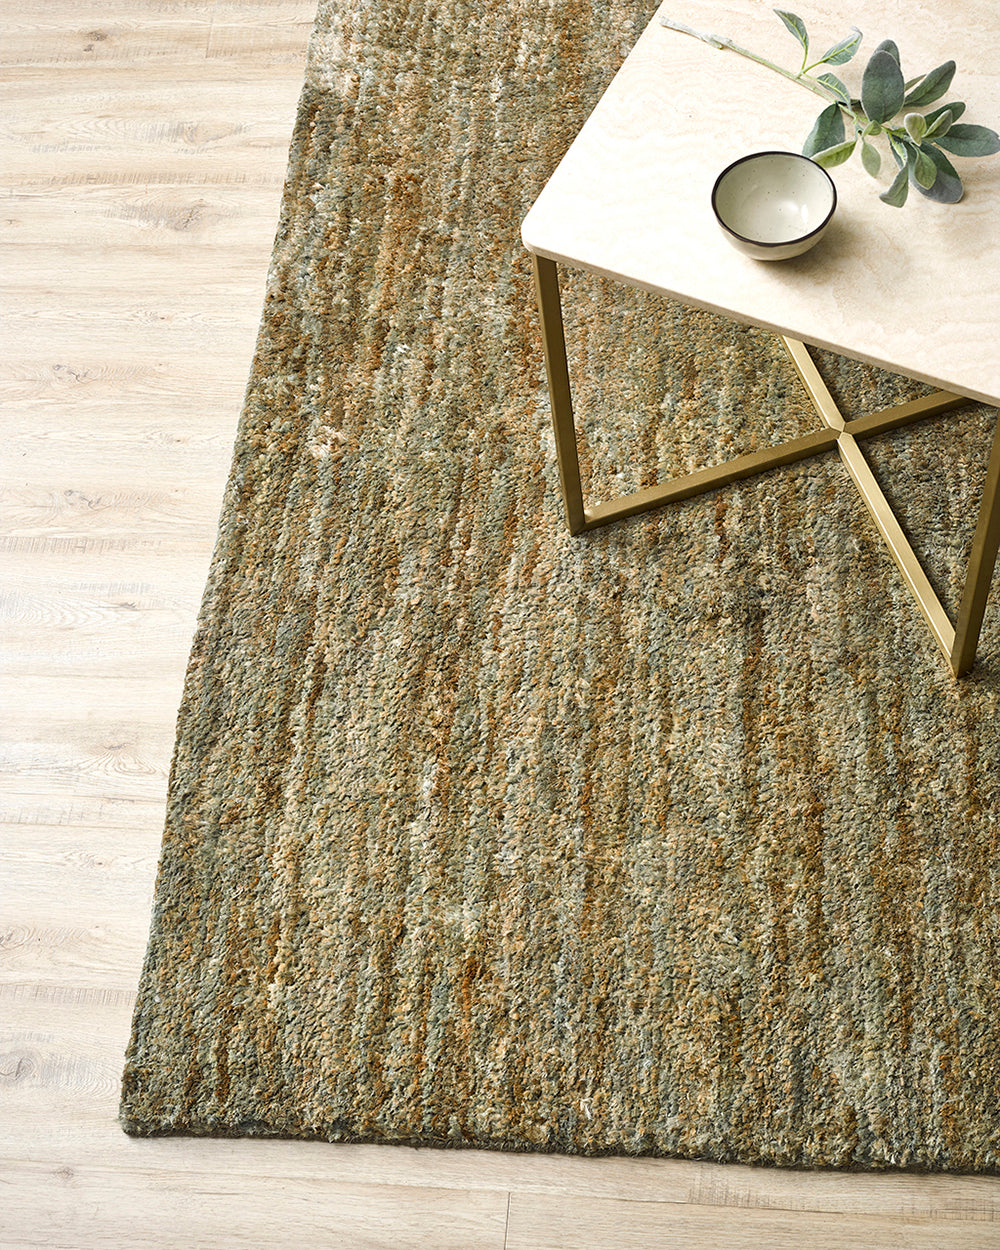 Pampas Spring Green Rug from Baya Furtex Stockist Make Your House A Home, Furniture Store Bendigo. Free Australia Wide Delivery. Mulberi Rugs.